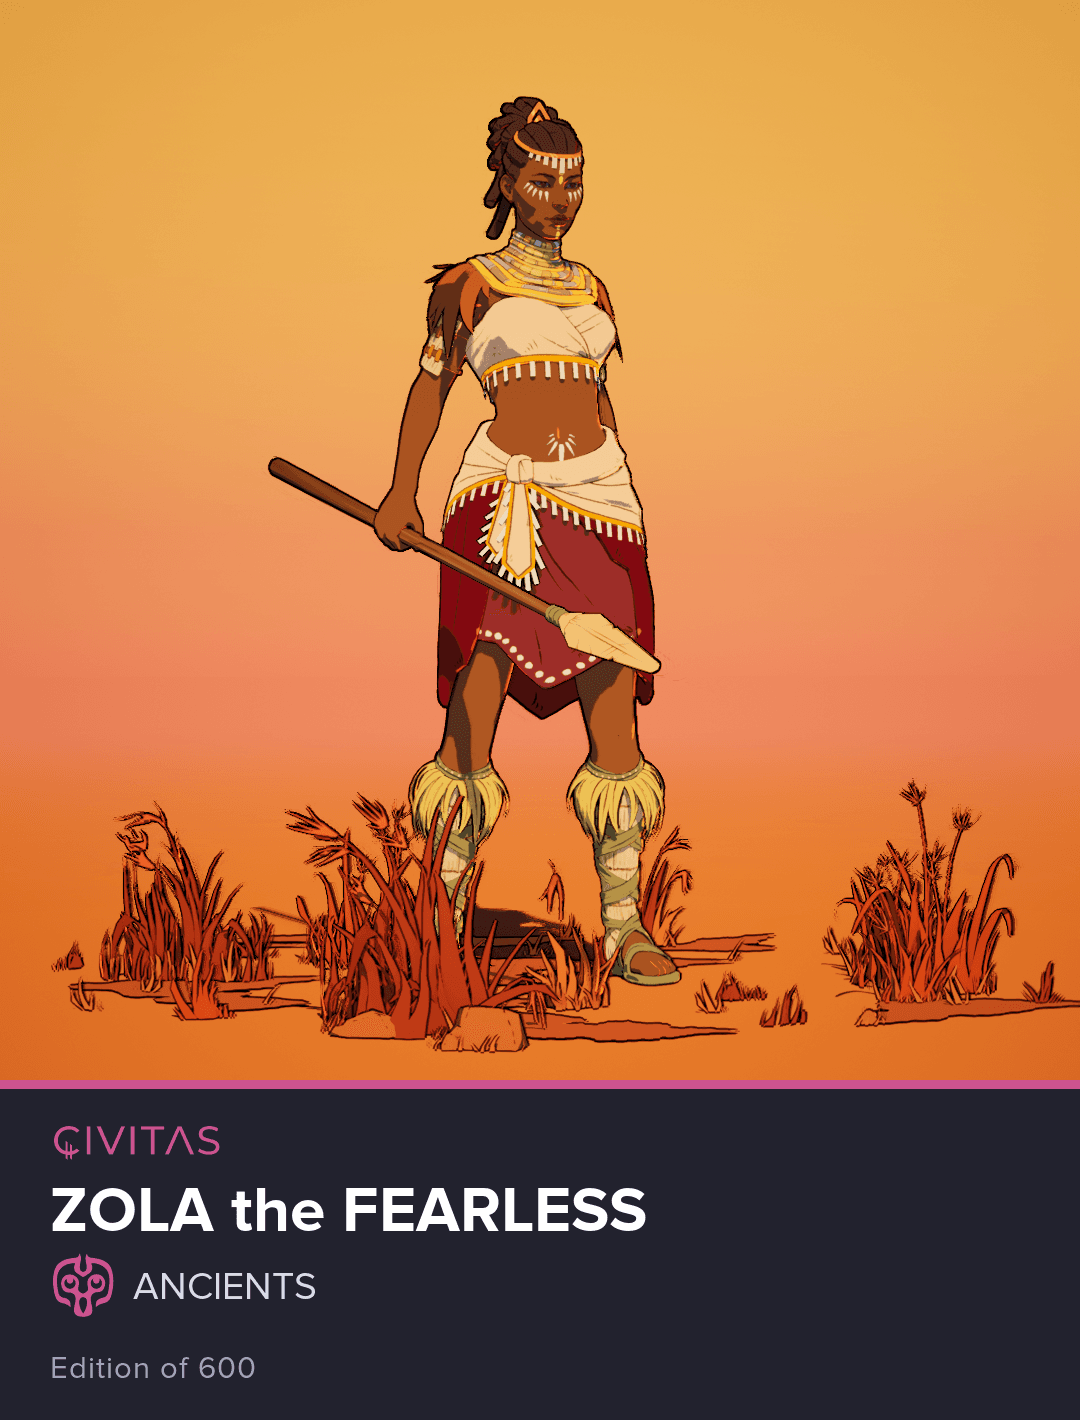 Zola the Fearless #329